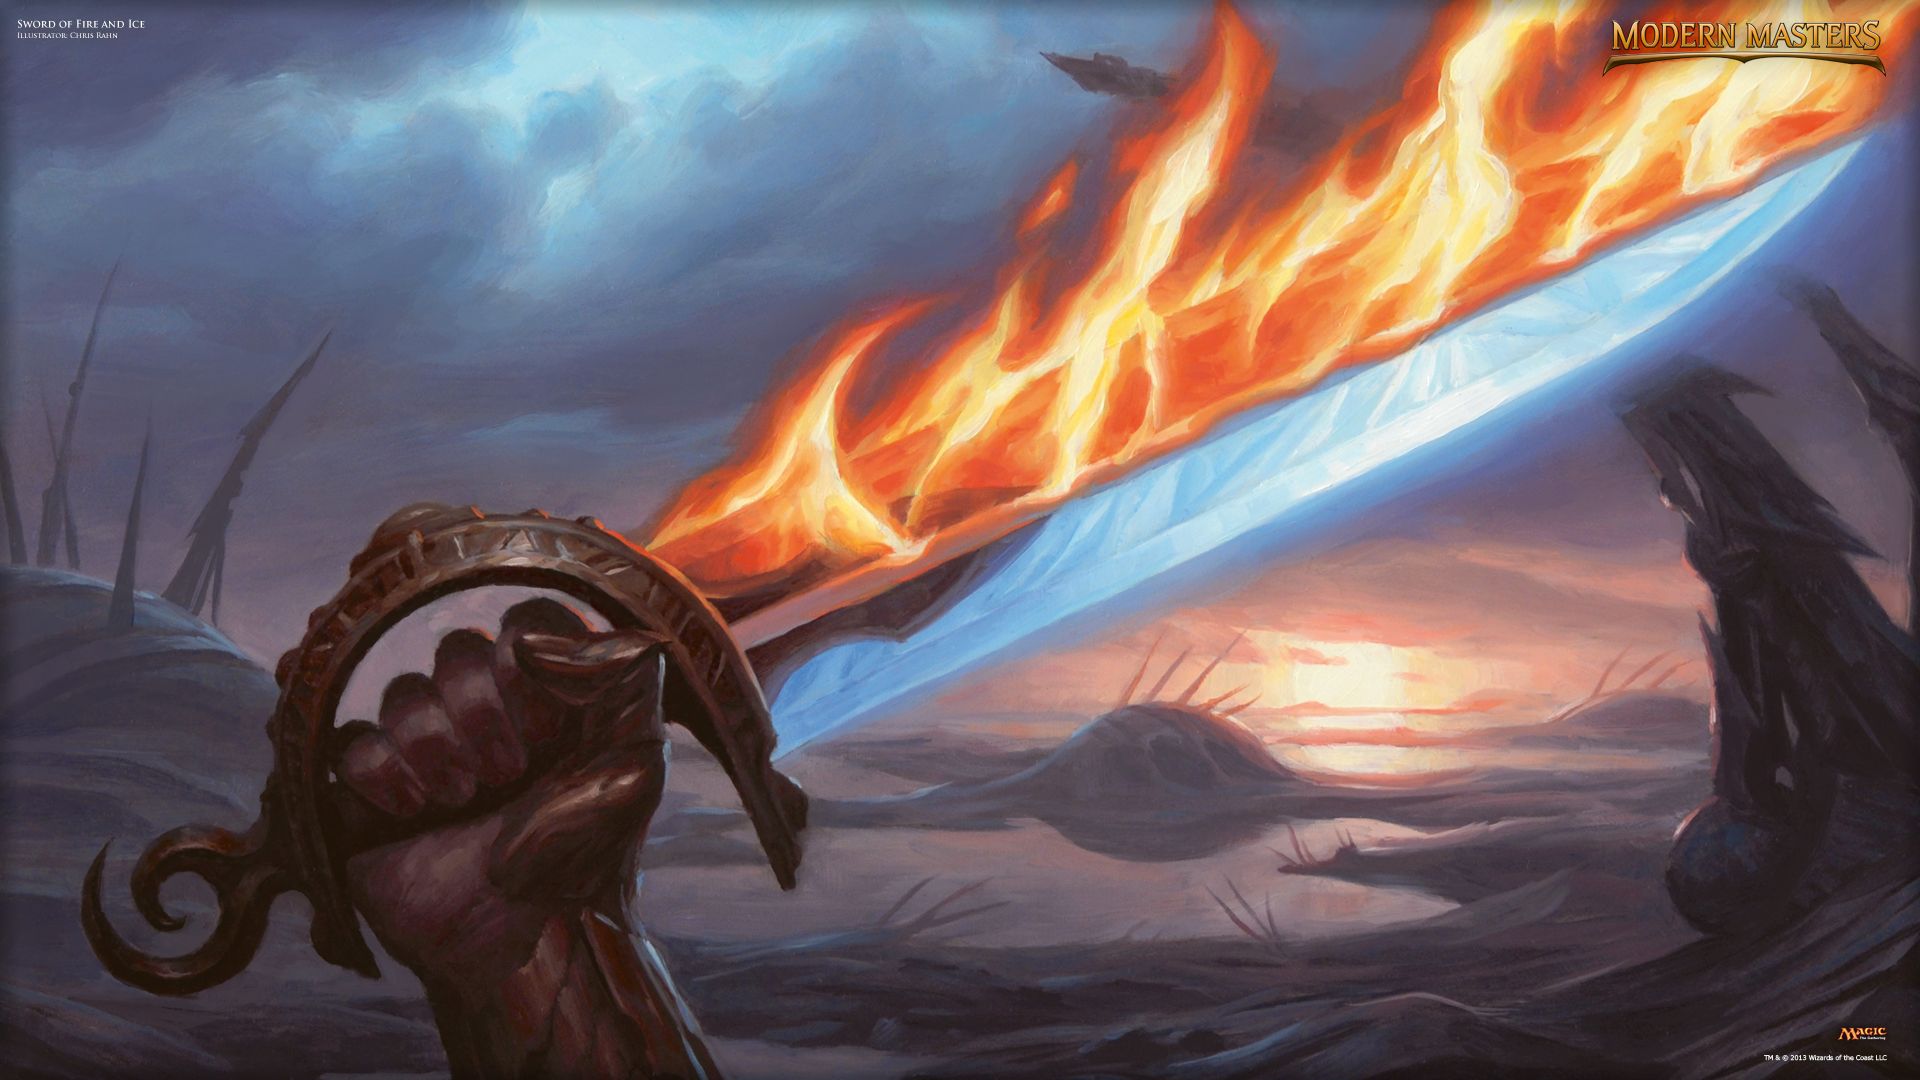 Free download Sword of Fire and Ice MMA 1920x1080 Wallpaperjpg [1920x1080] for your Desktop, Mobile & Tablet. Explore Fire and Ice Wallpaper. Fire Dragon Wallpaper, Fire Dept Wallpaper and